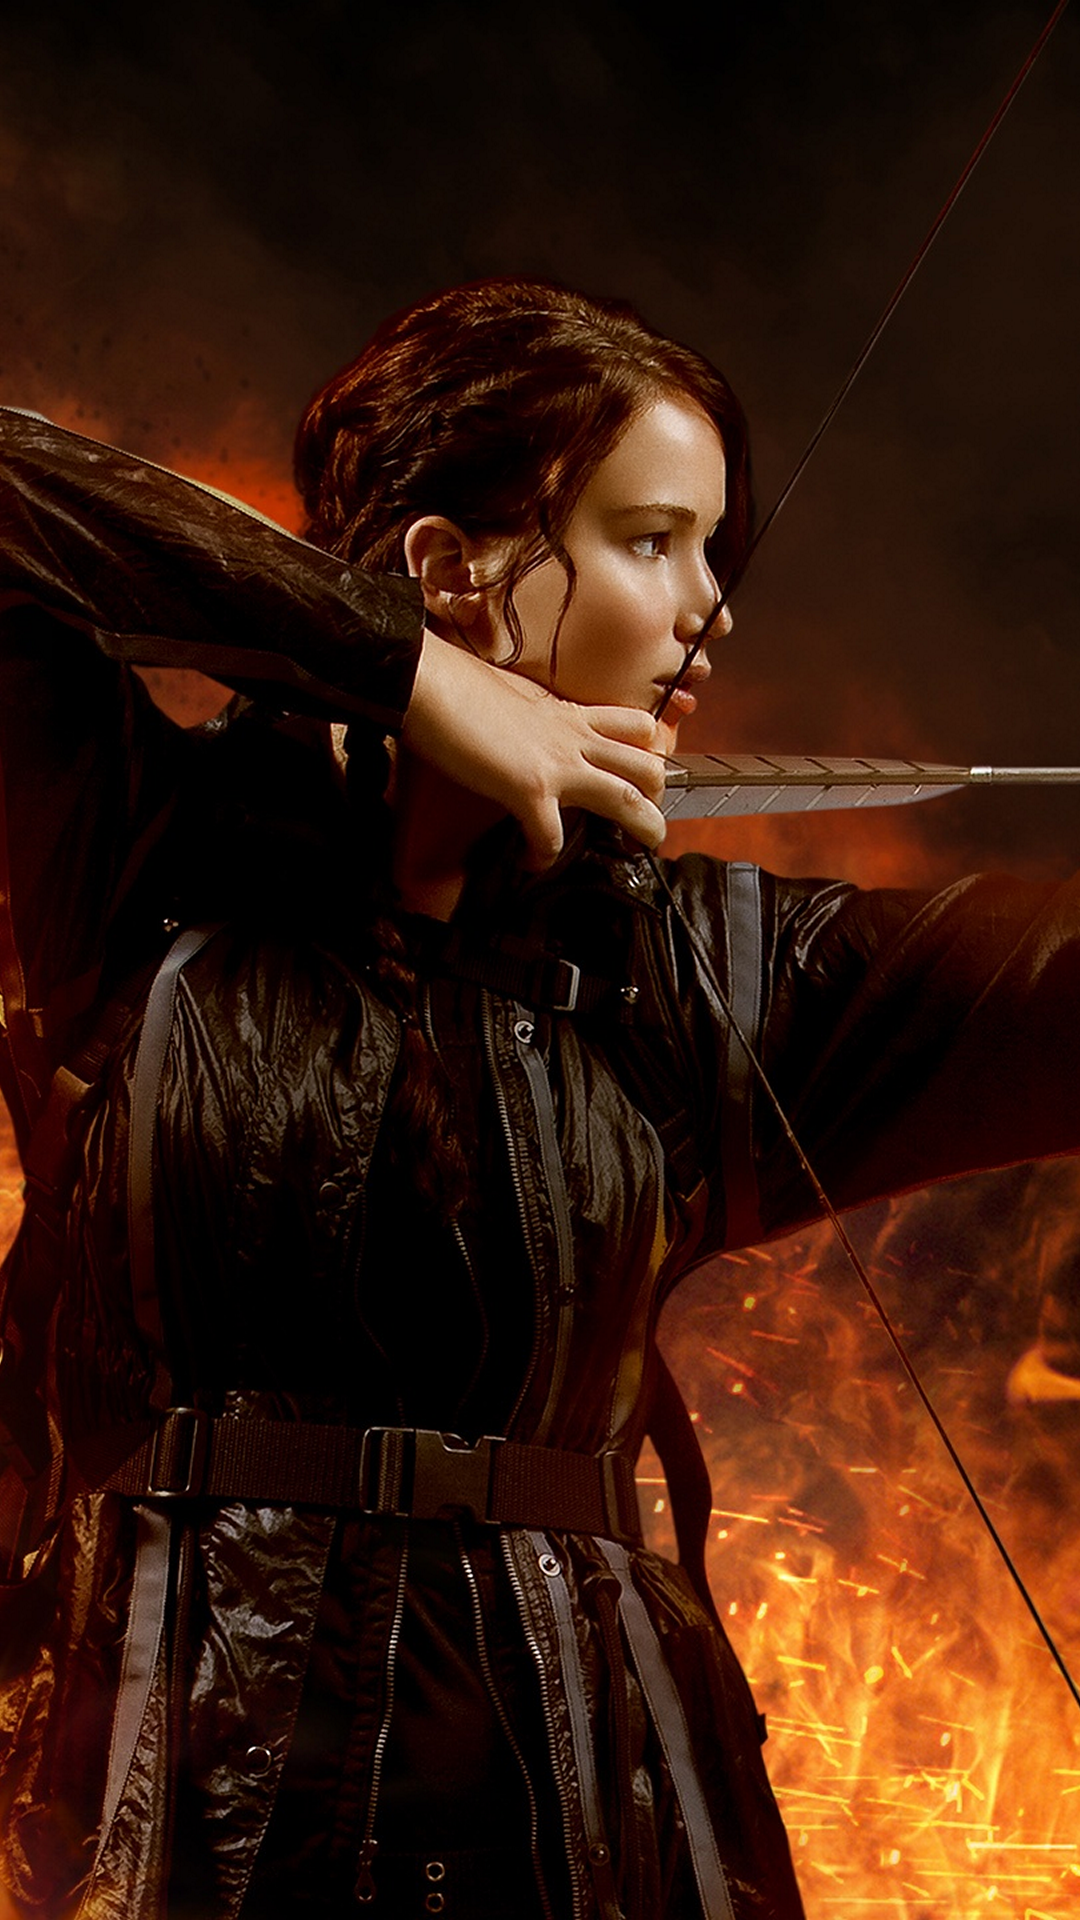 Catching Fire, Katniss , Entertainment Backgrounds, wallpapers for Samsung Galaxy S4, fondos galaxy s4, fondos de pantalla galaxy s4, sfondi samsung galaxy s4, hintergrund HD 1080x1920